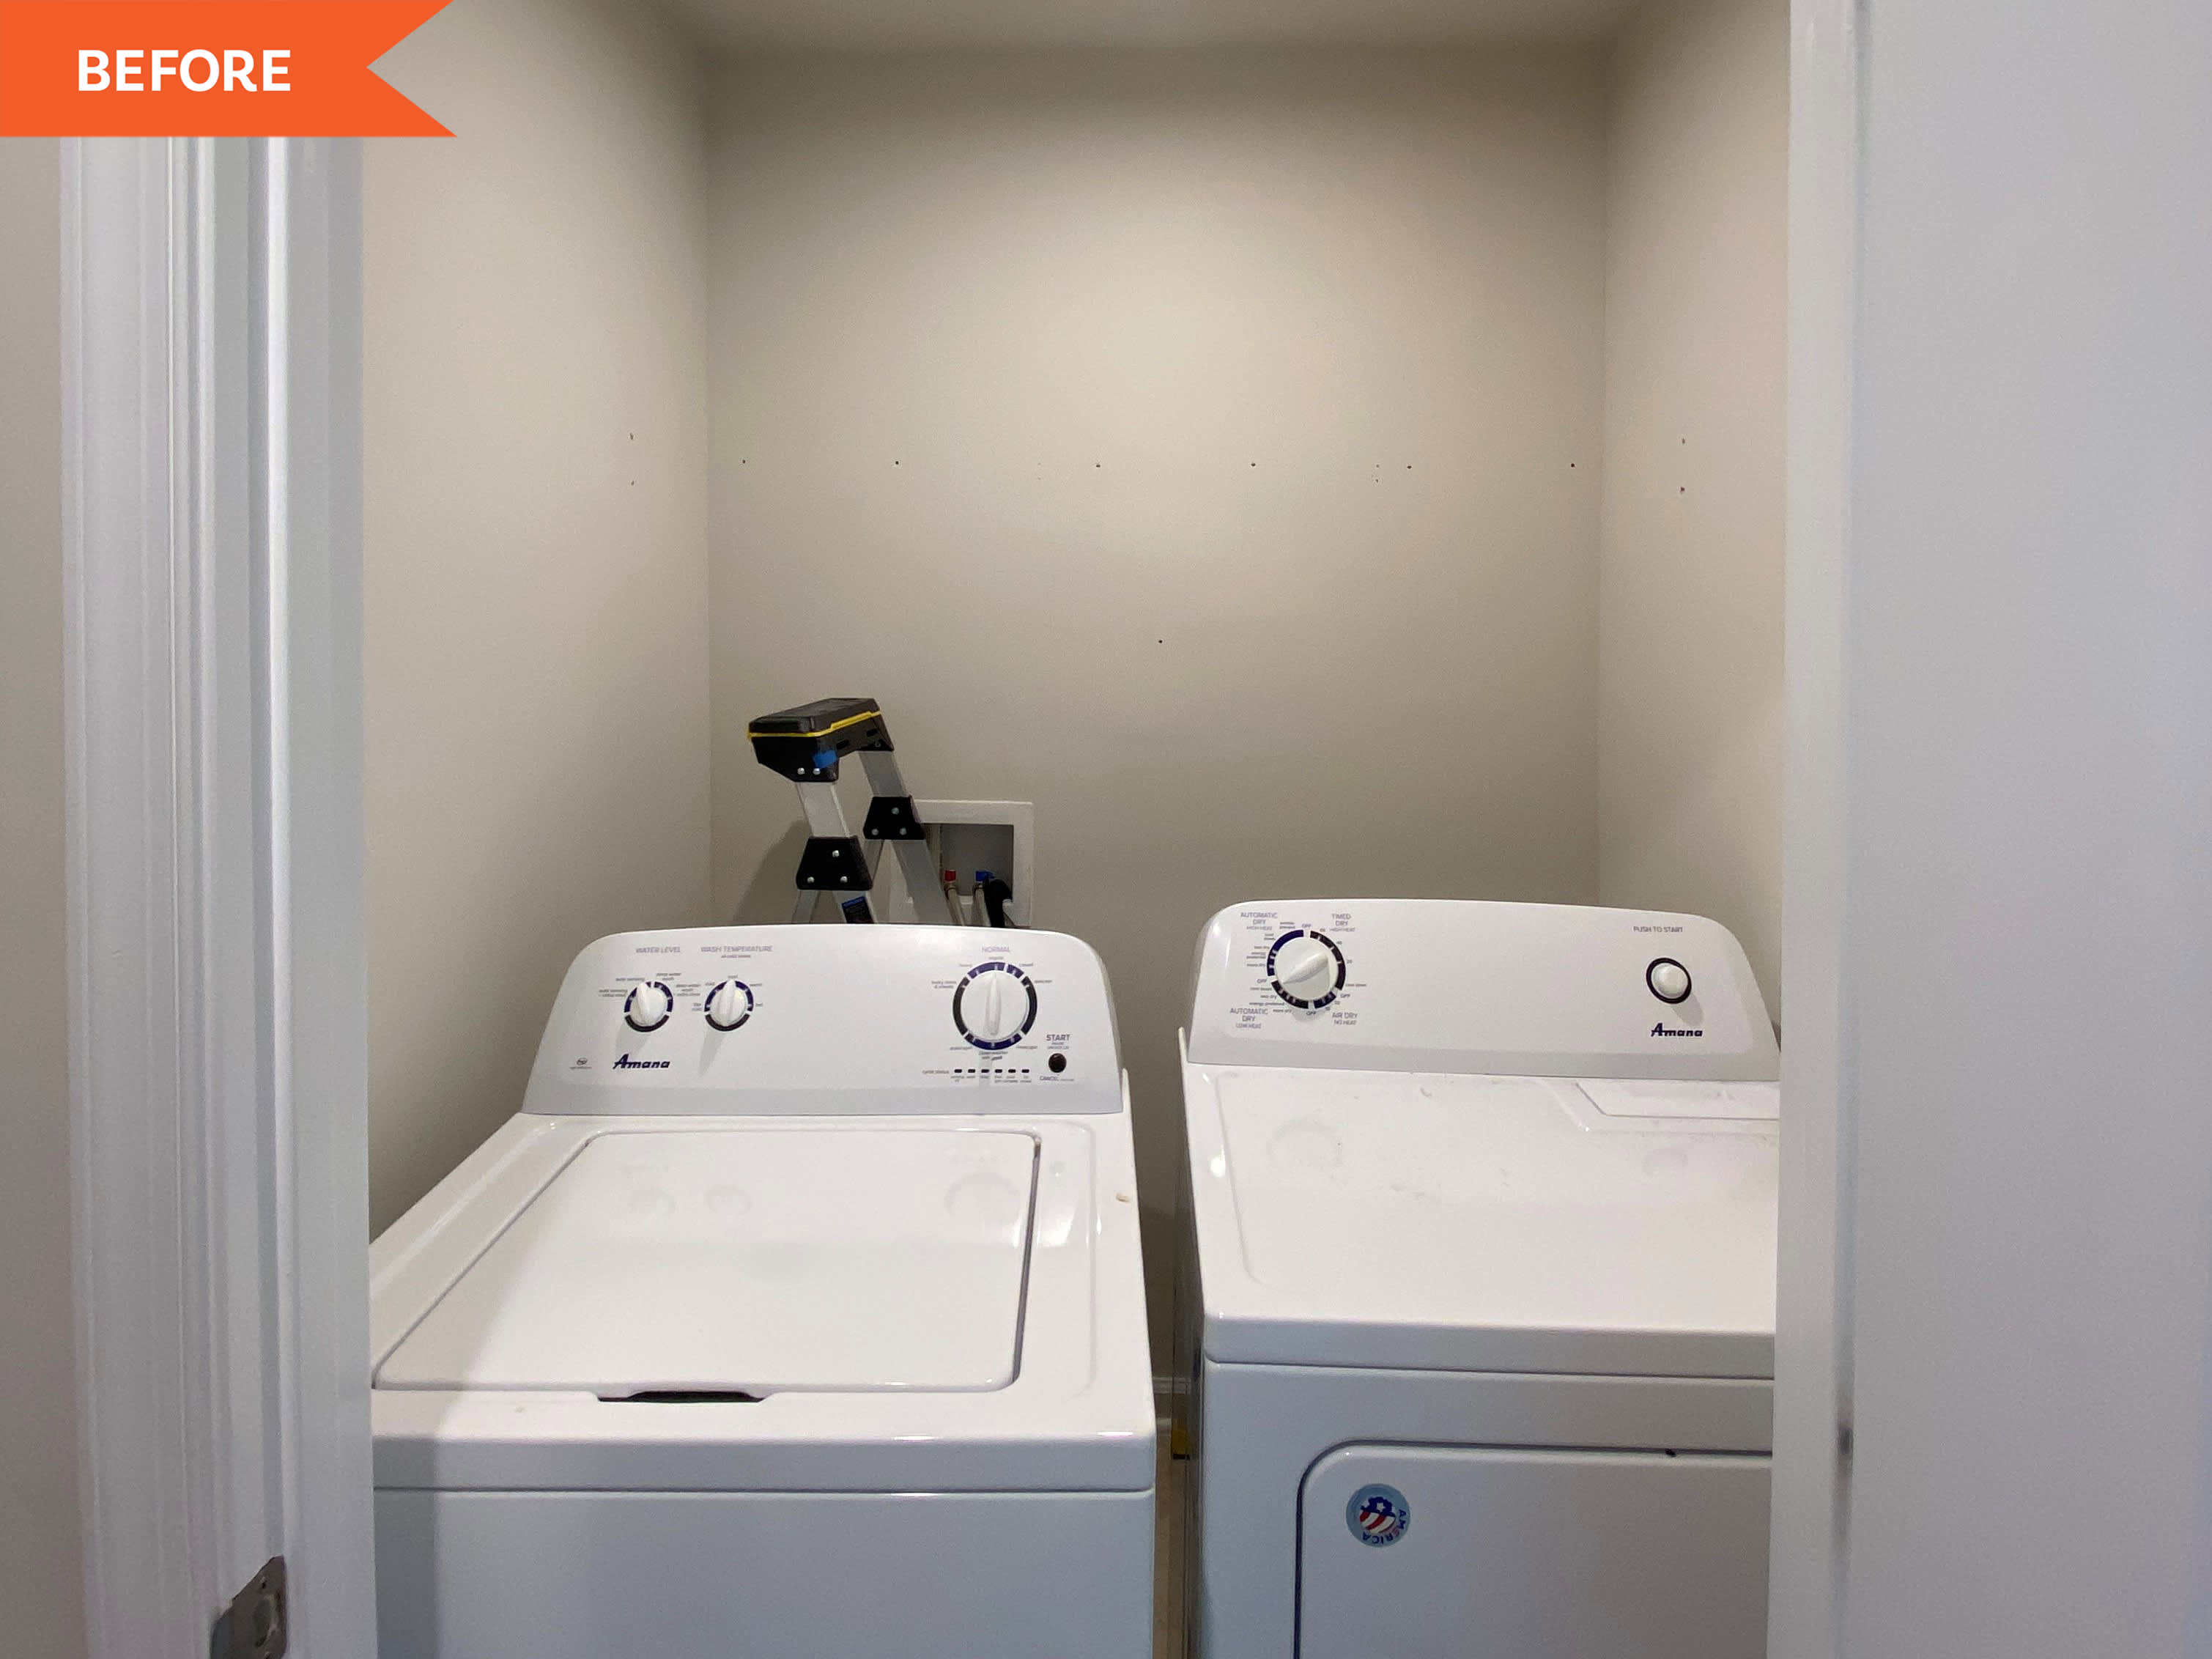 31 Laundry Room Ideas That Are Anything but Boring